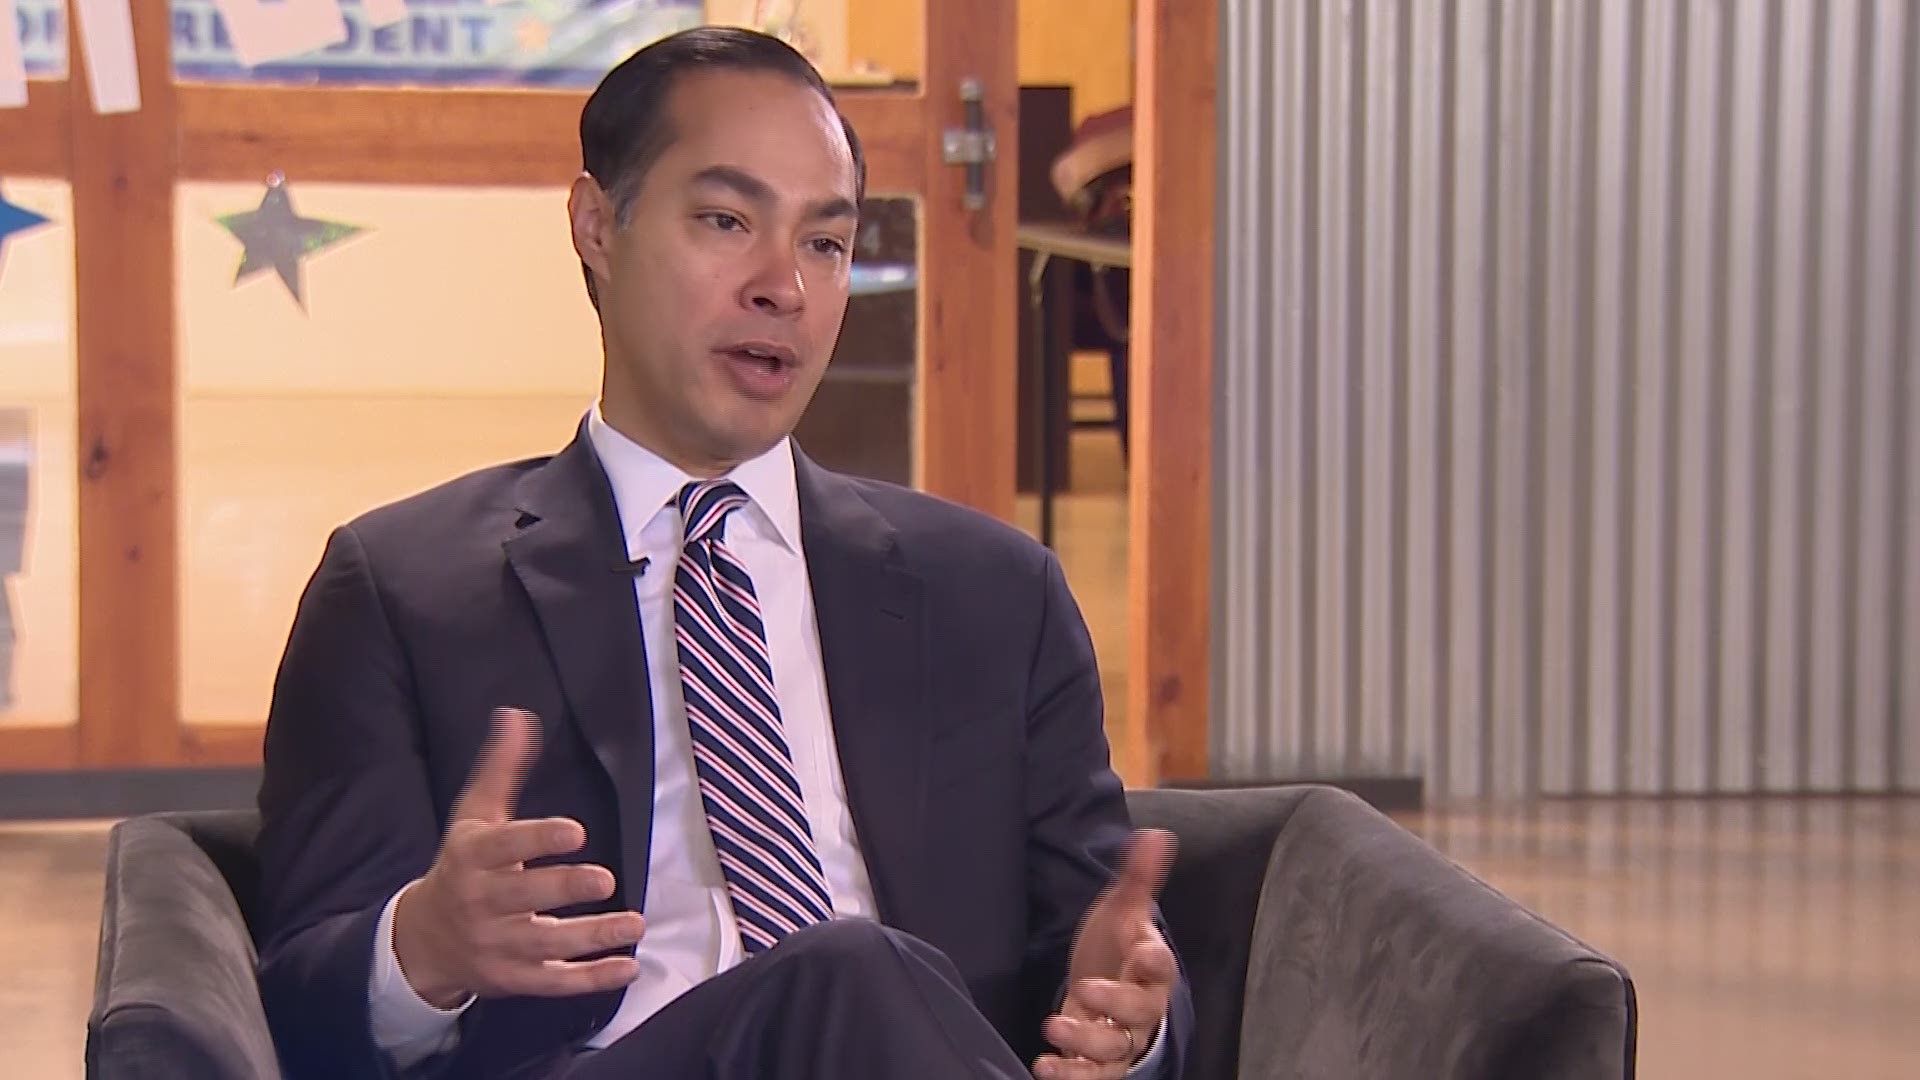 The former San Antonio Mayor and Housing Urban Development Secretary sits down with KENS 5 to share milestones and lessons learned from his presidential campaign.